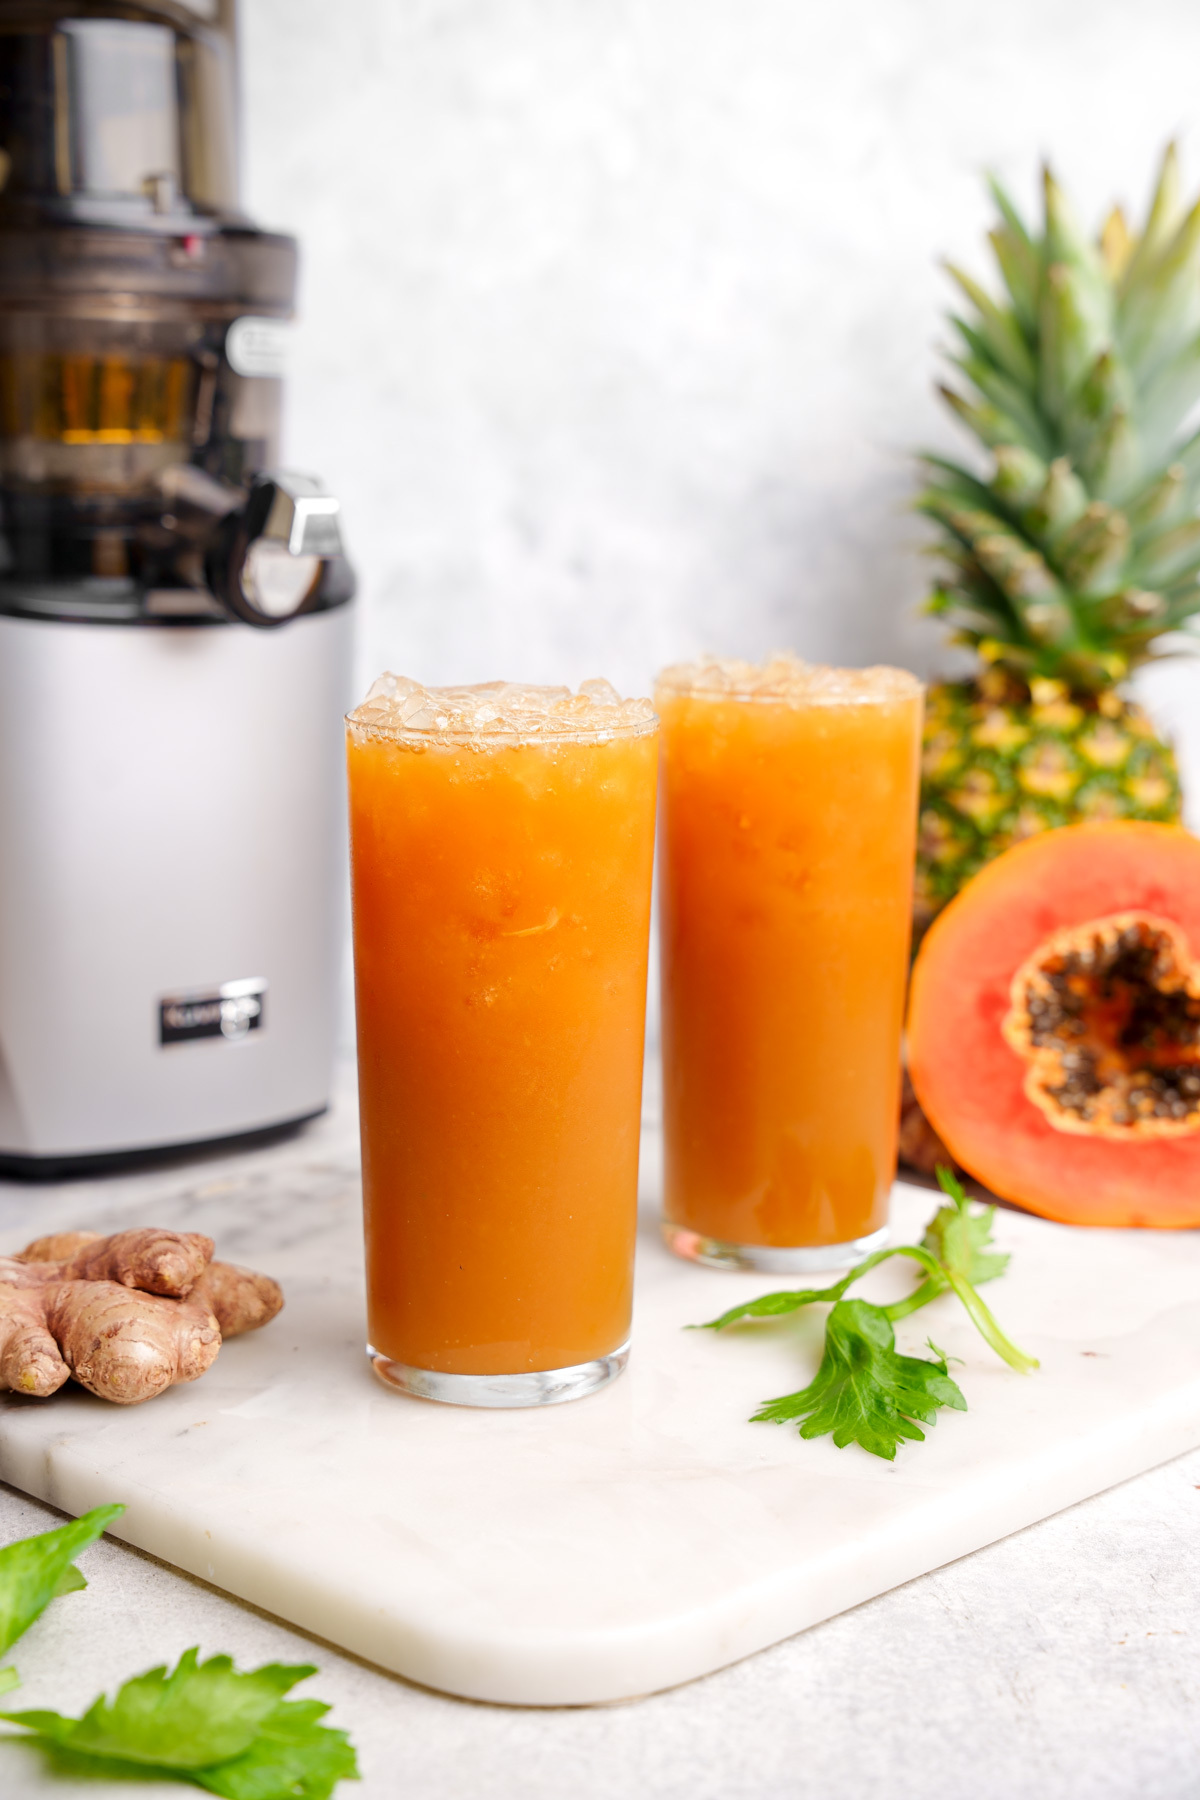 the papaya juice with the fresh ingredients all around it and the kuvings juicer in the background